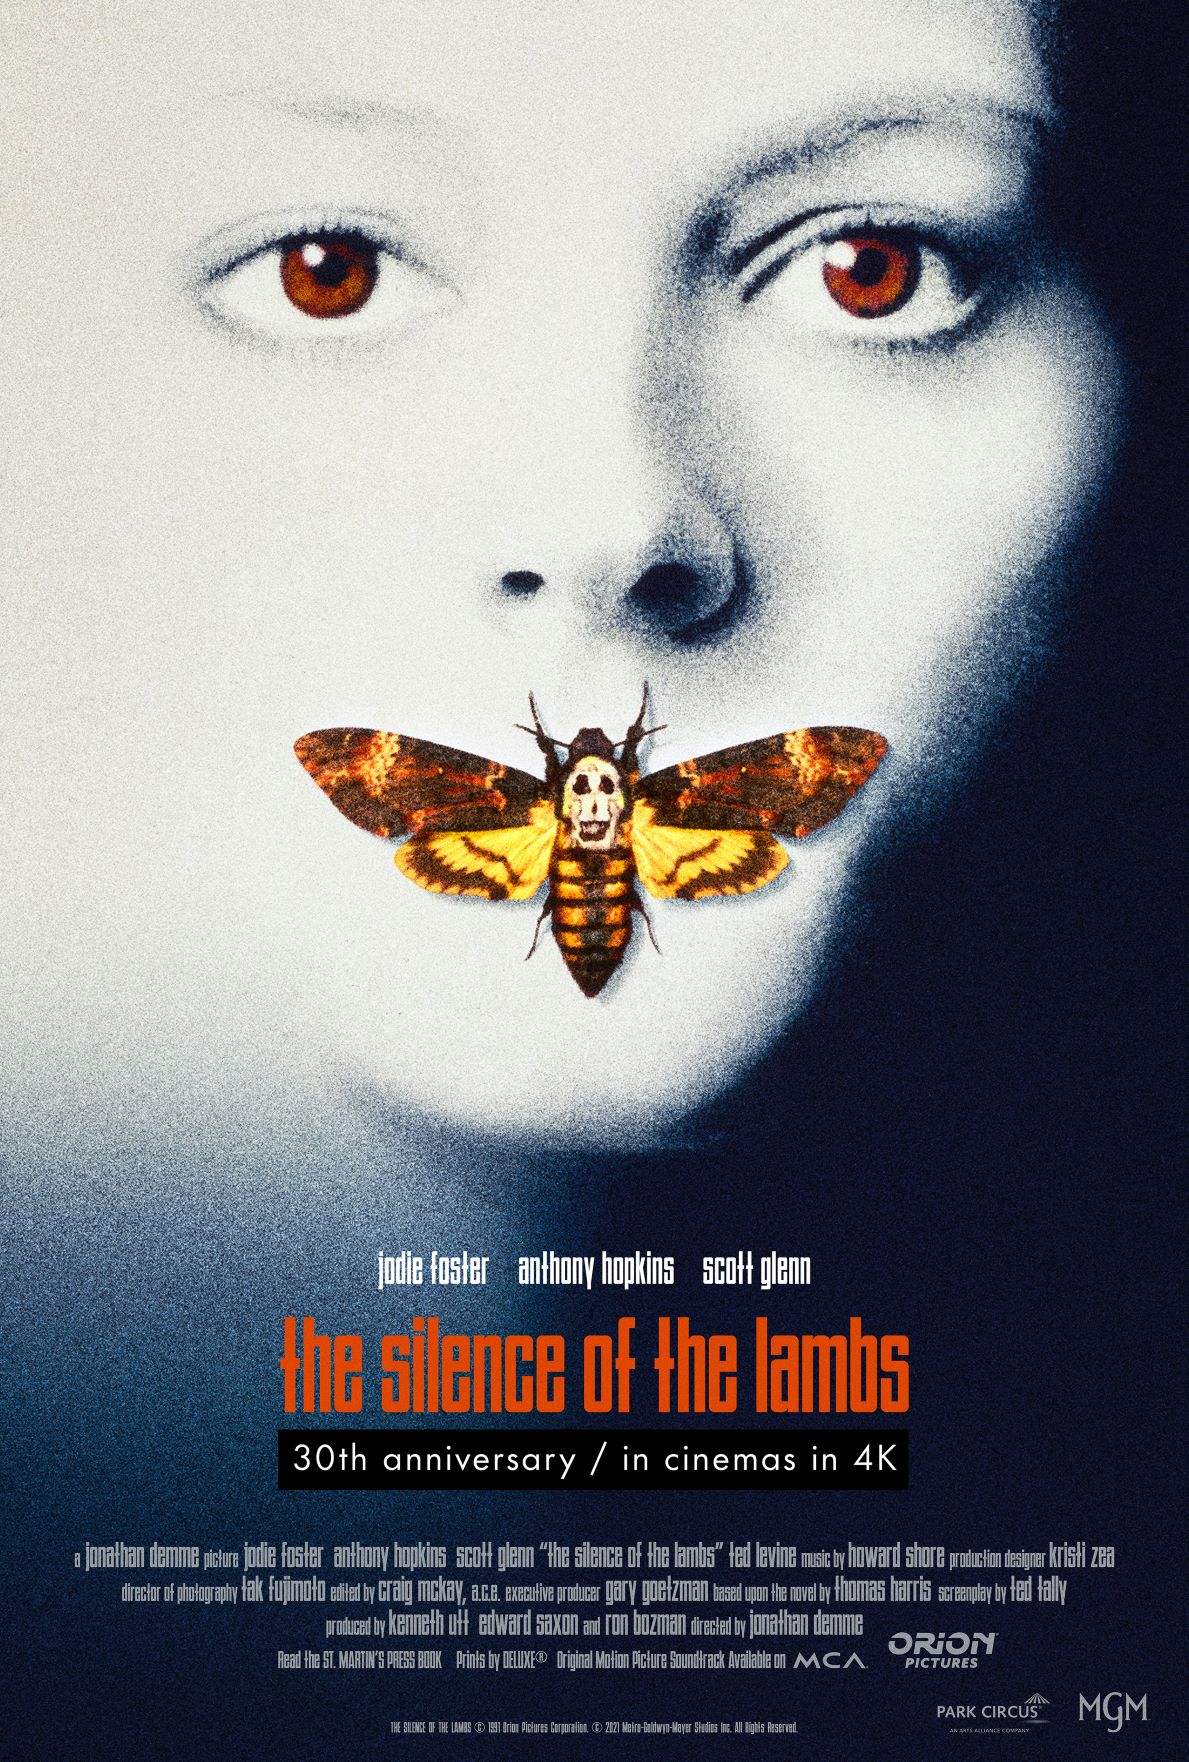 The Silence of the Lambs Poster